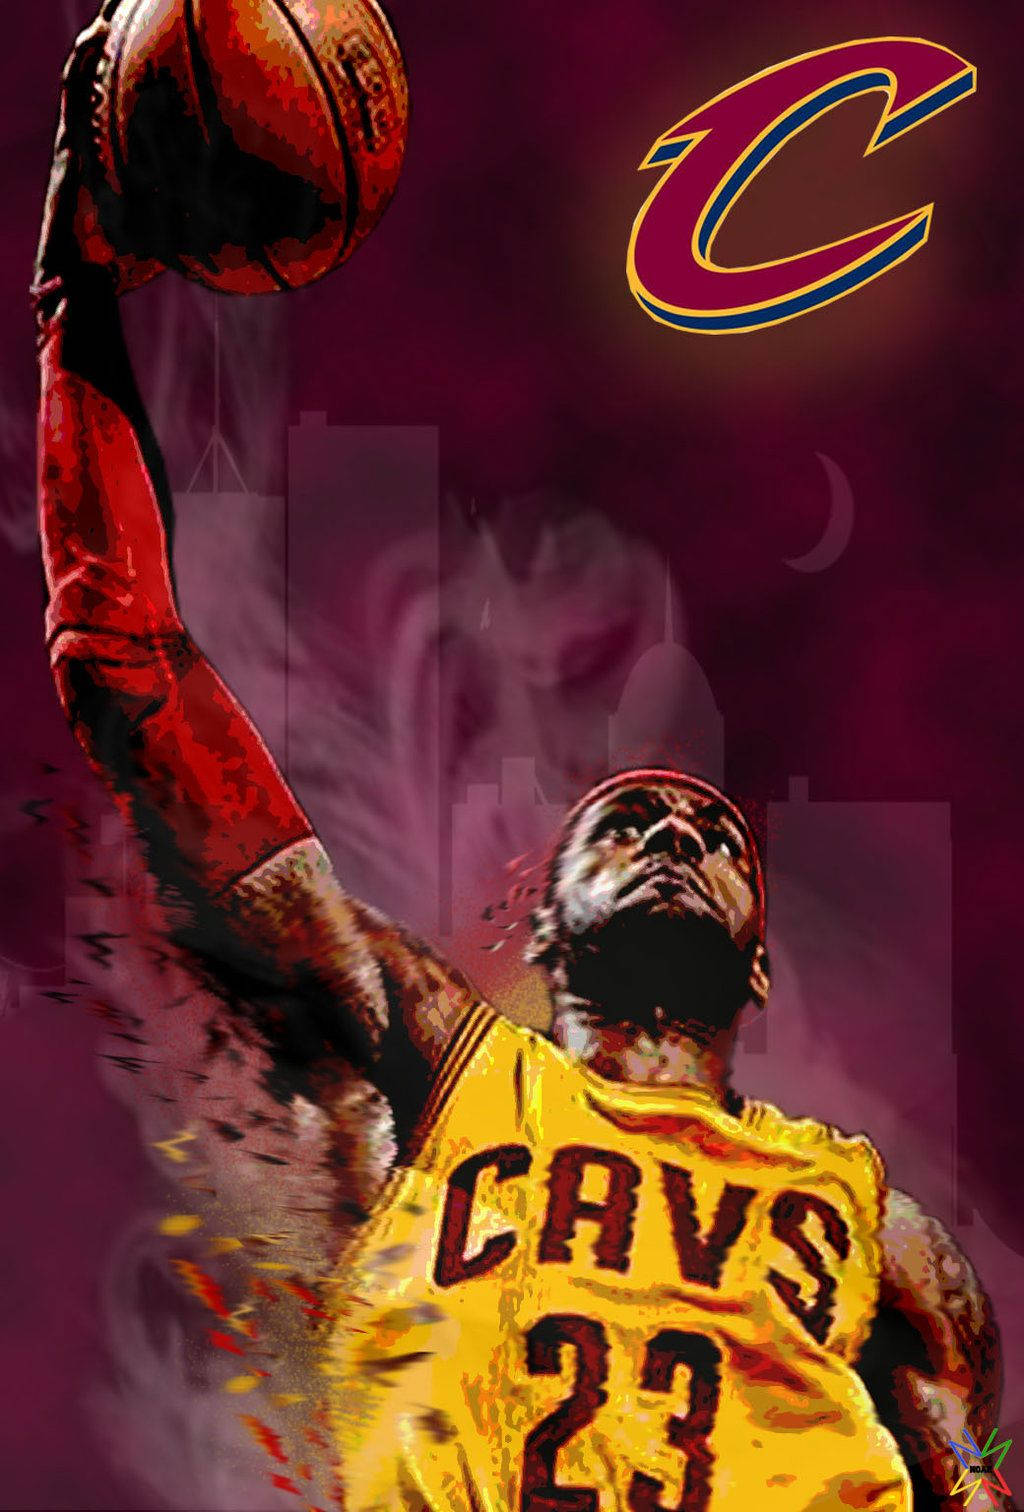 Basketball star Lebron James in his Cleveland Cavaliers jersey. Wallpaper